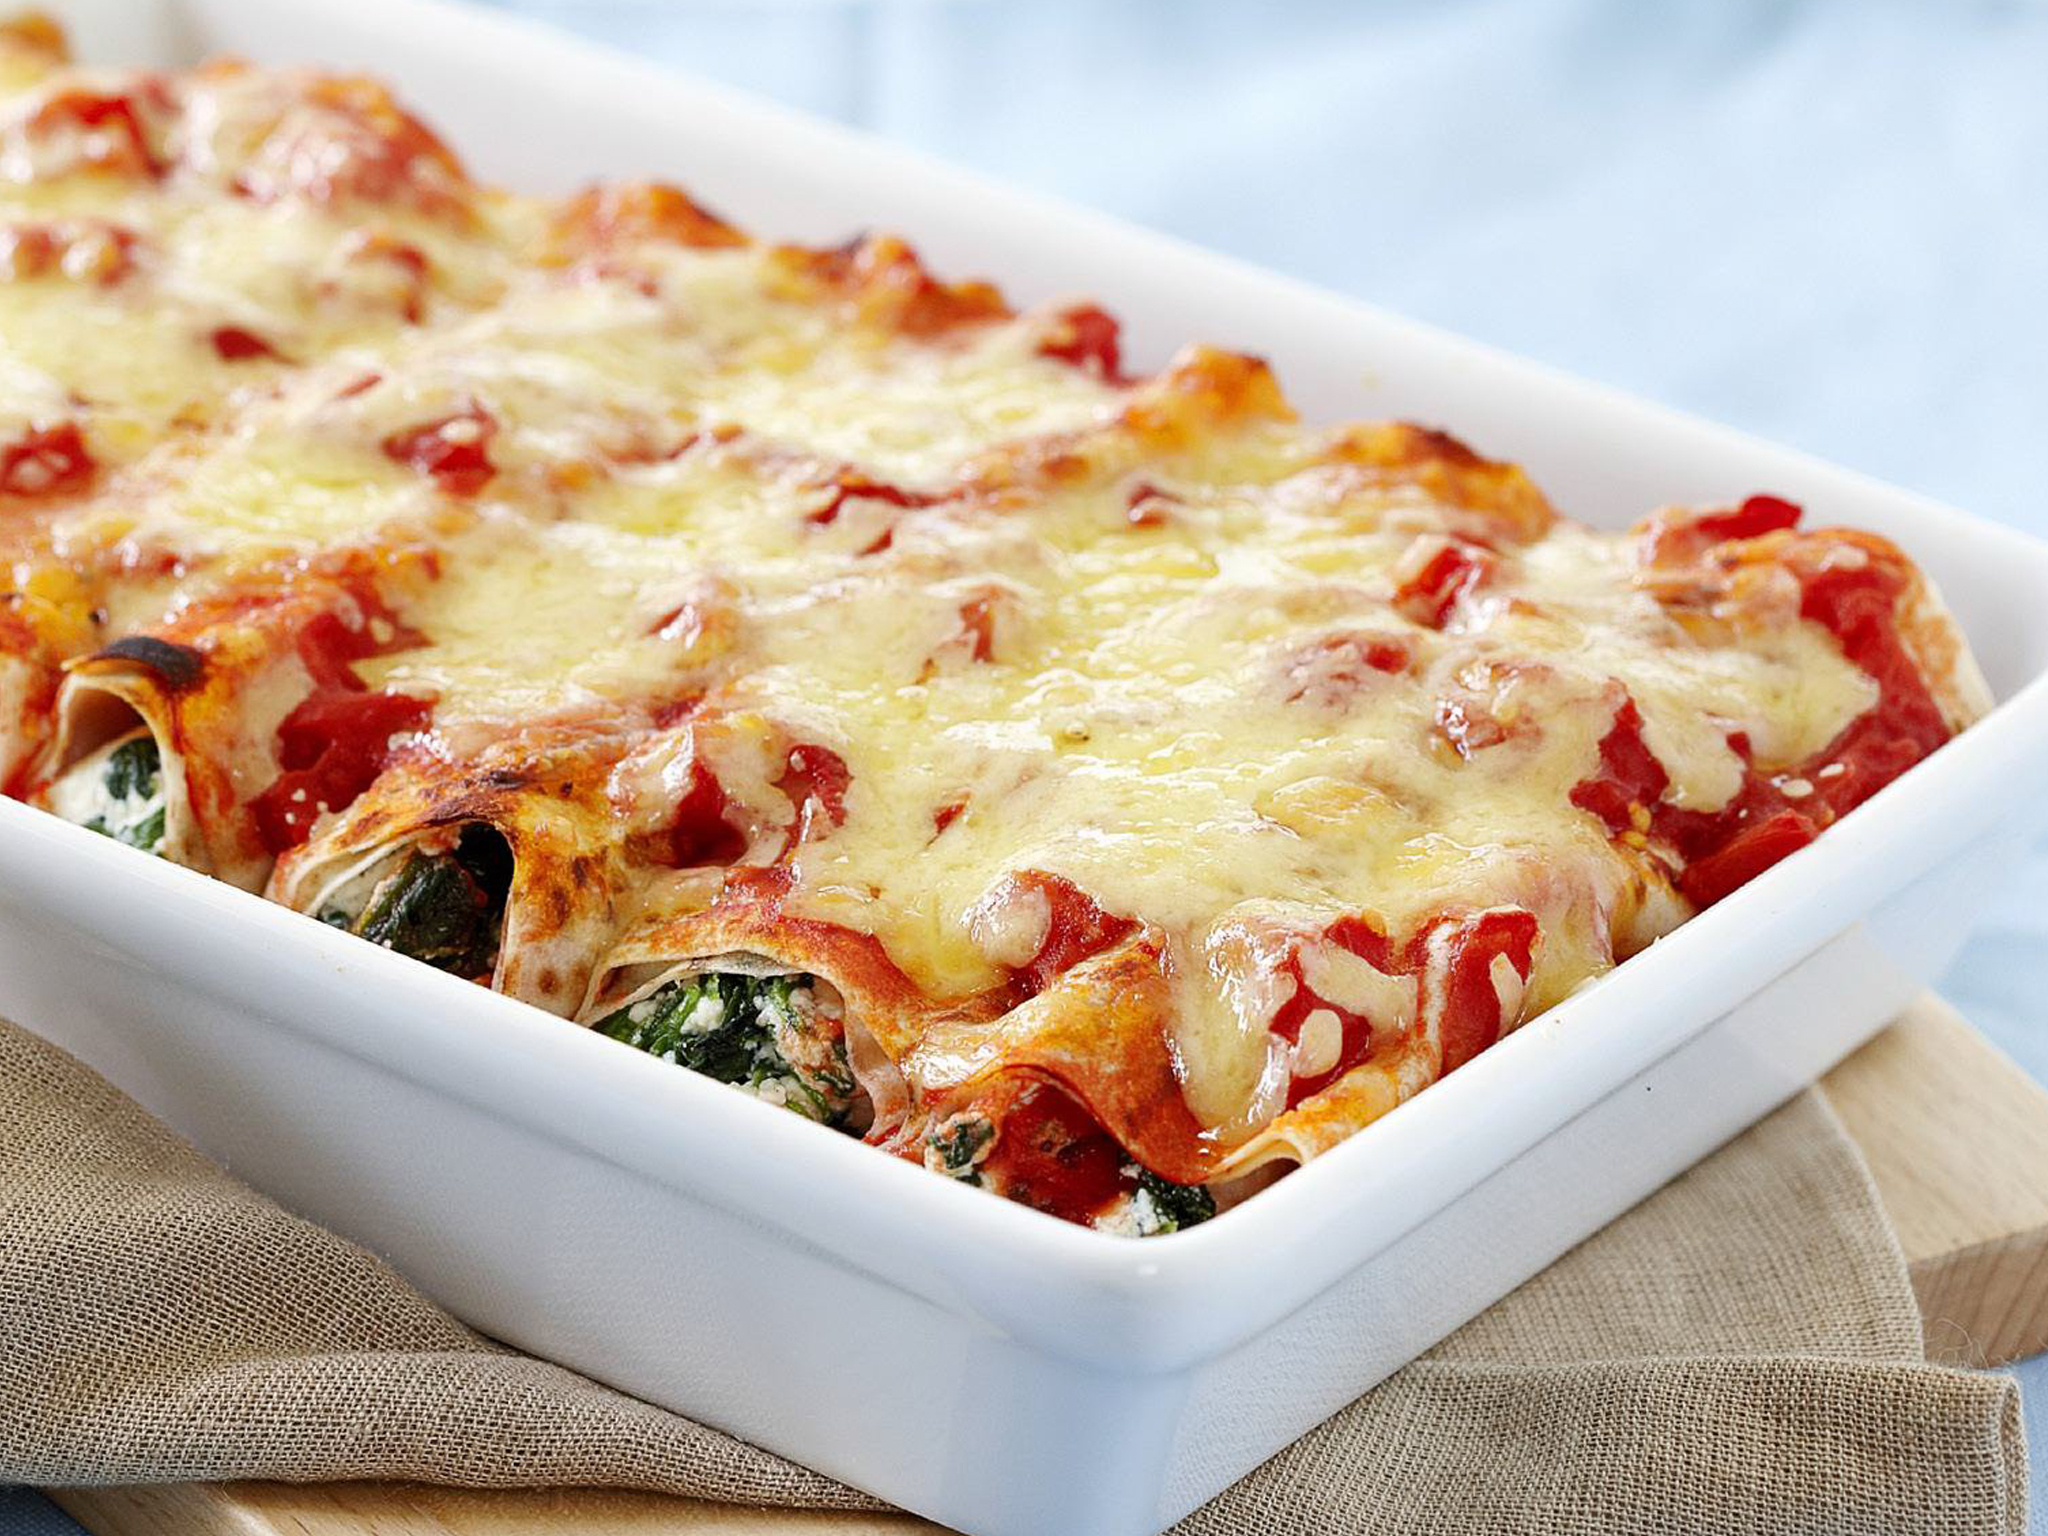 WHOLEMEAL SPINACH AND RICOTTA CANNELLONI